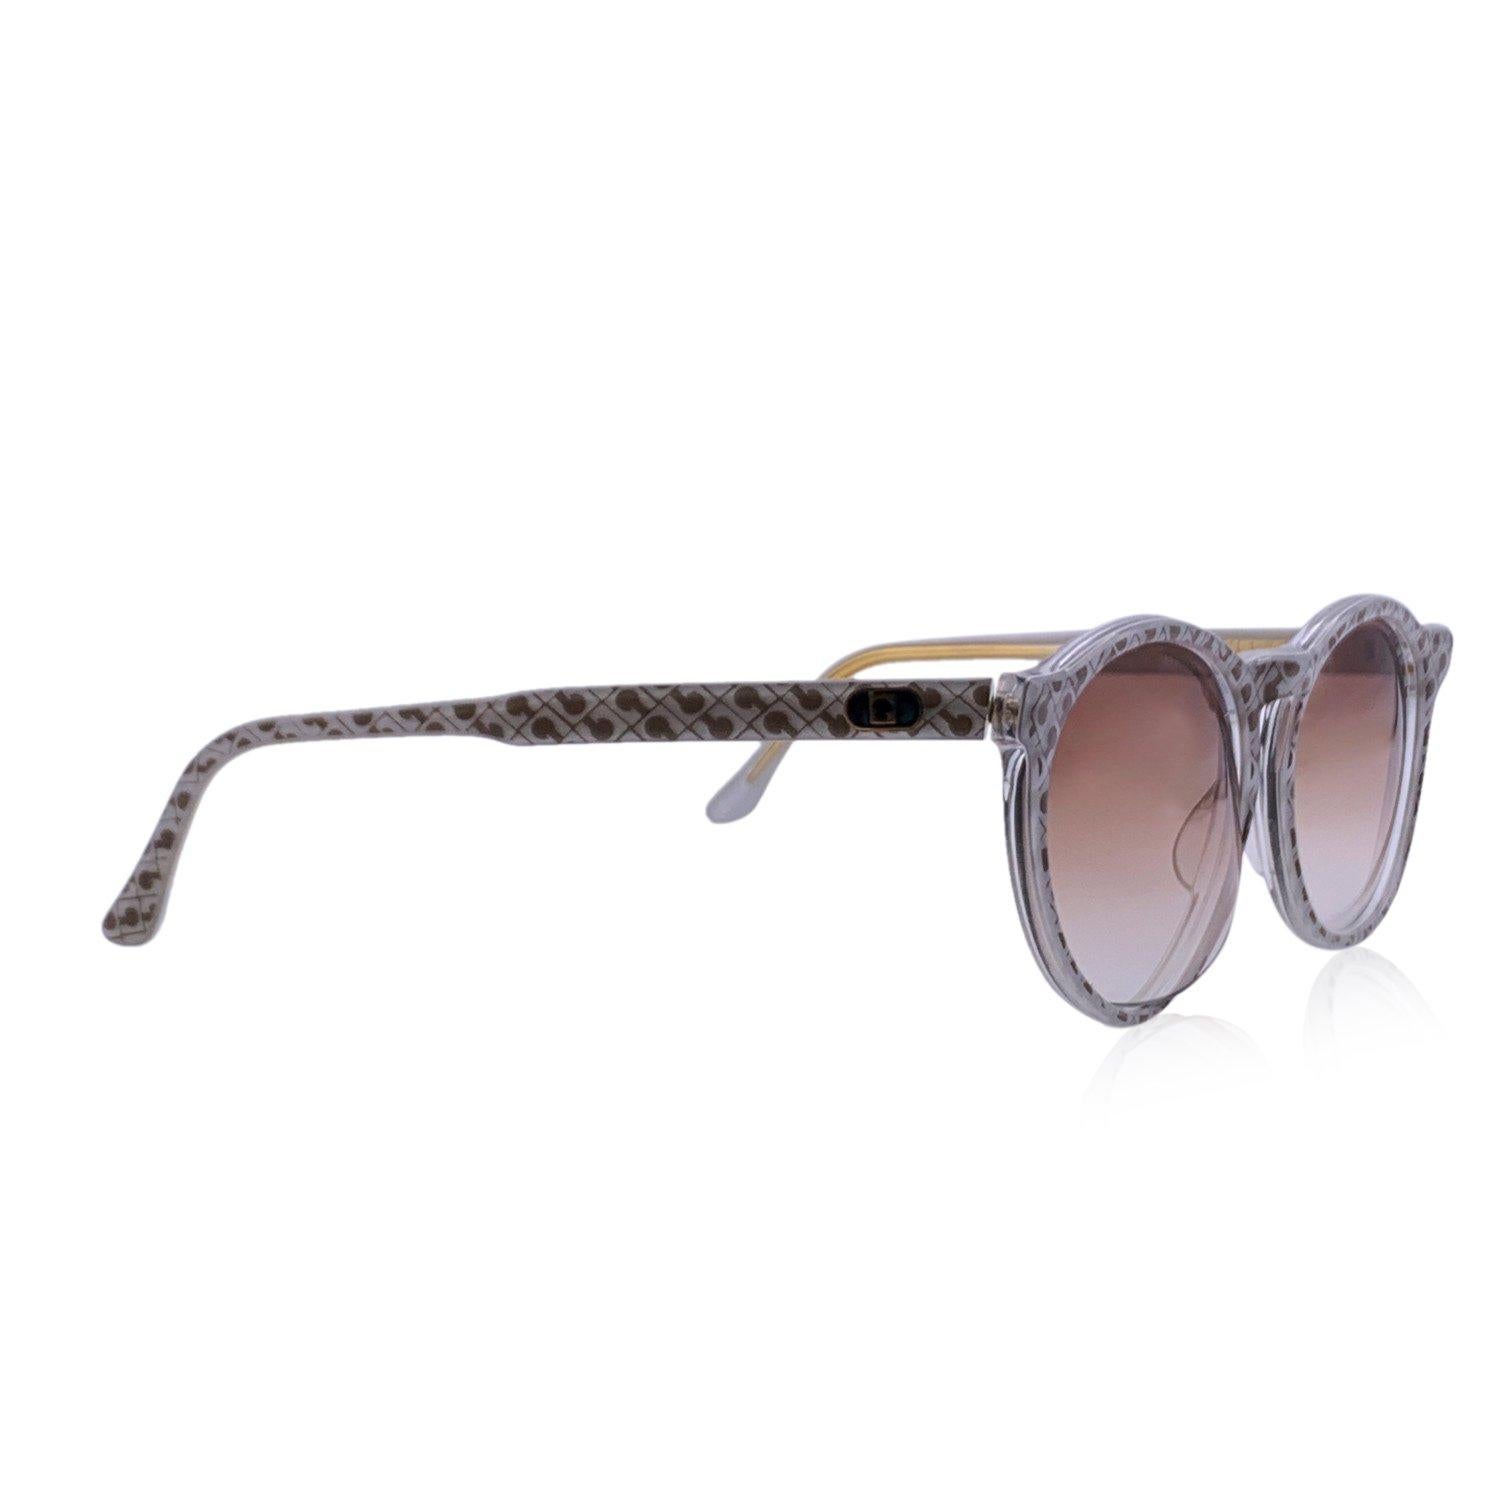 Vintage Gherardini sunglasses mod. Corda G/2. White and beige acetate frame with logo pattern. Original 100% Total UVA/UVB protection in gradient brown color. Gherardini logo on temples. Made in Italy Details MATERIAL: Acetate COLOR: White MODEL: